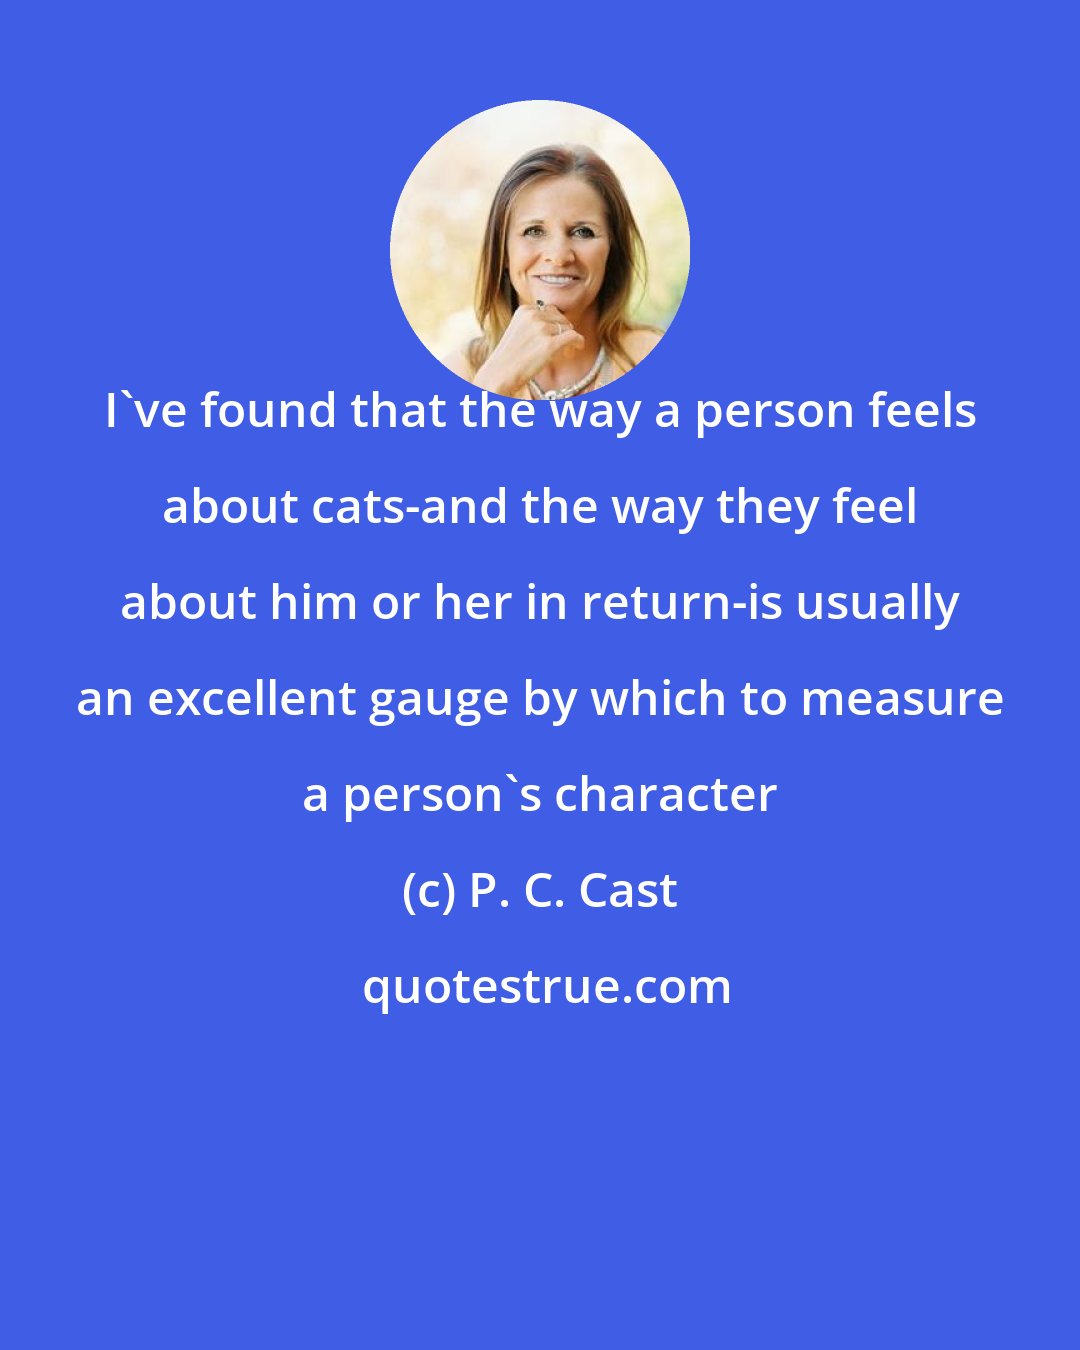 P. C. Cast: I've found that the way a person feels about cats-and the way they feel about him or her in return-is usually an excellent gauge by which to measure a person's character